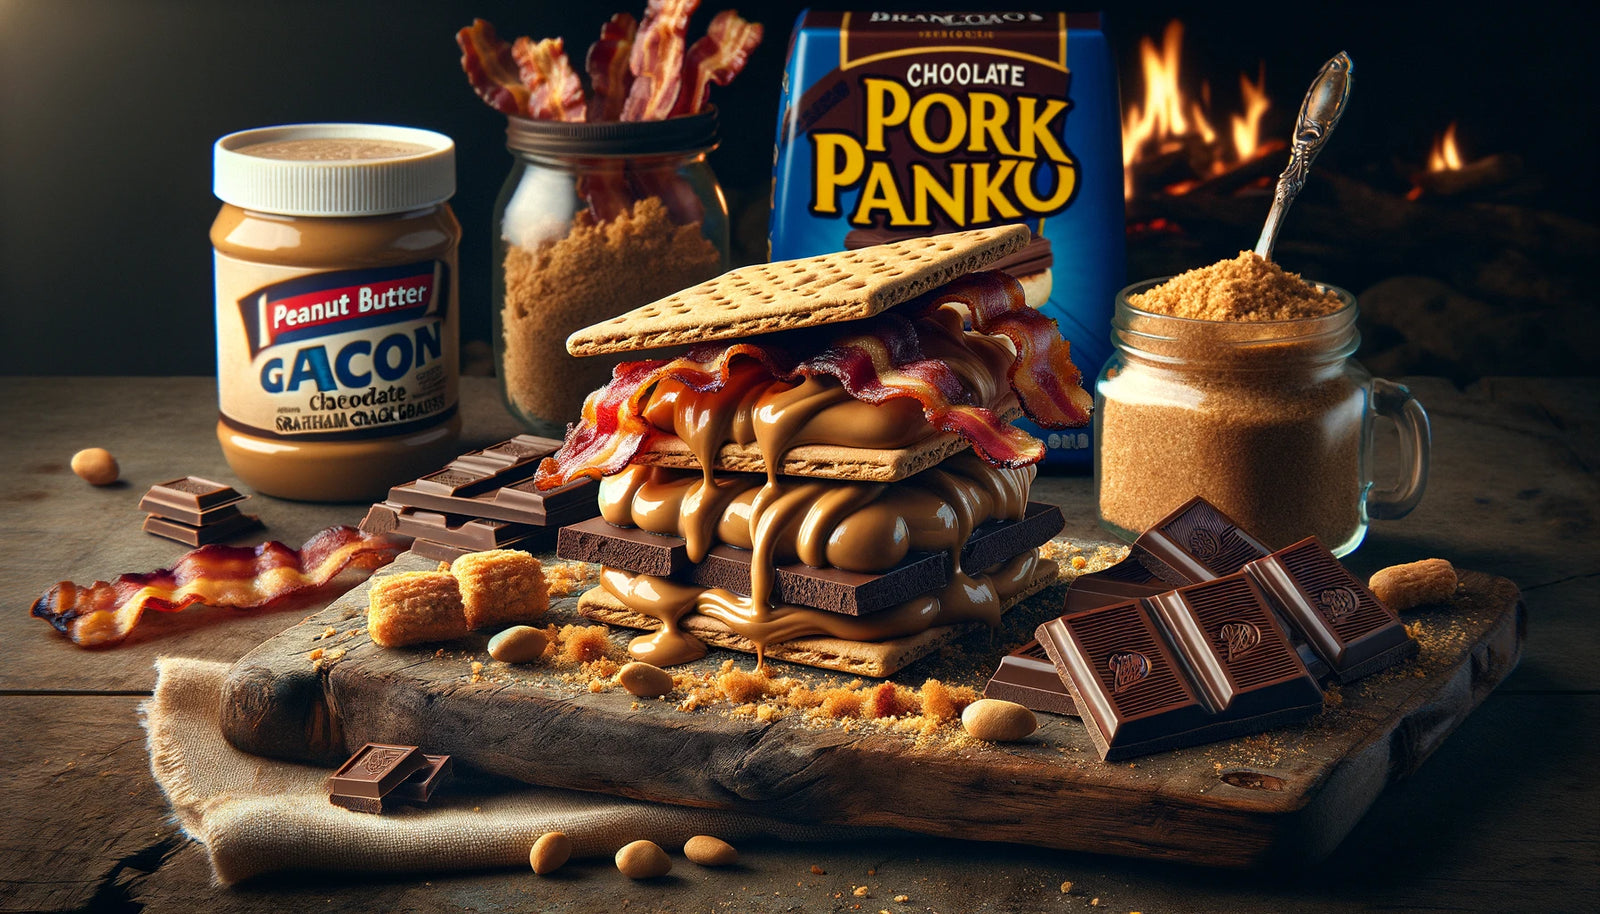 Peanut Butter Bacon Chocolate Graham Cracker S’mores with Pork Panko ...